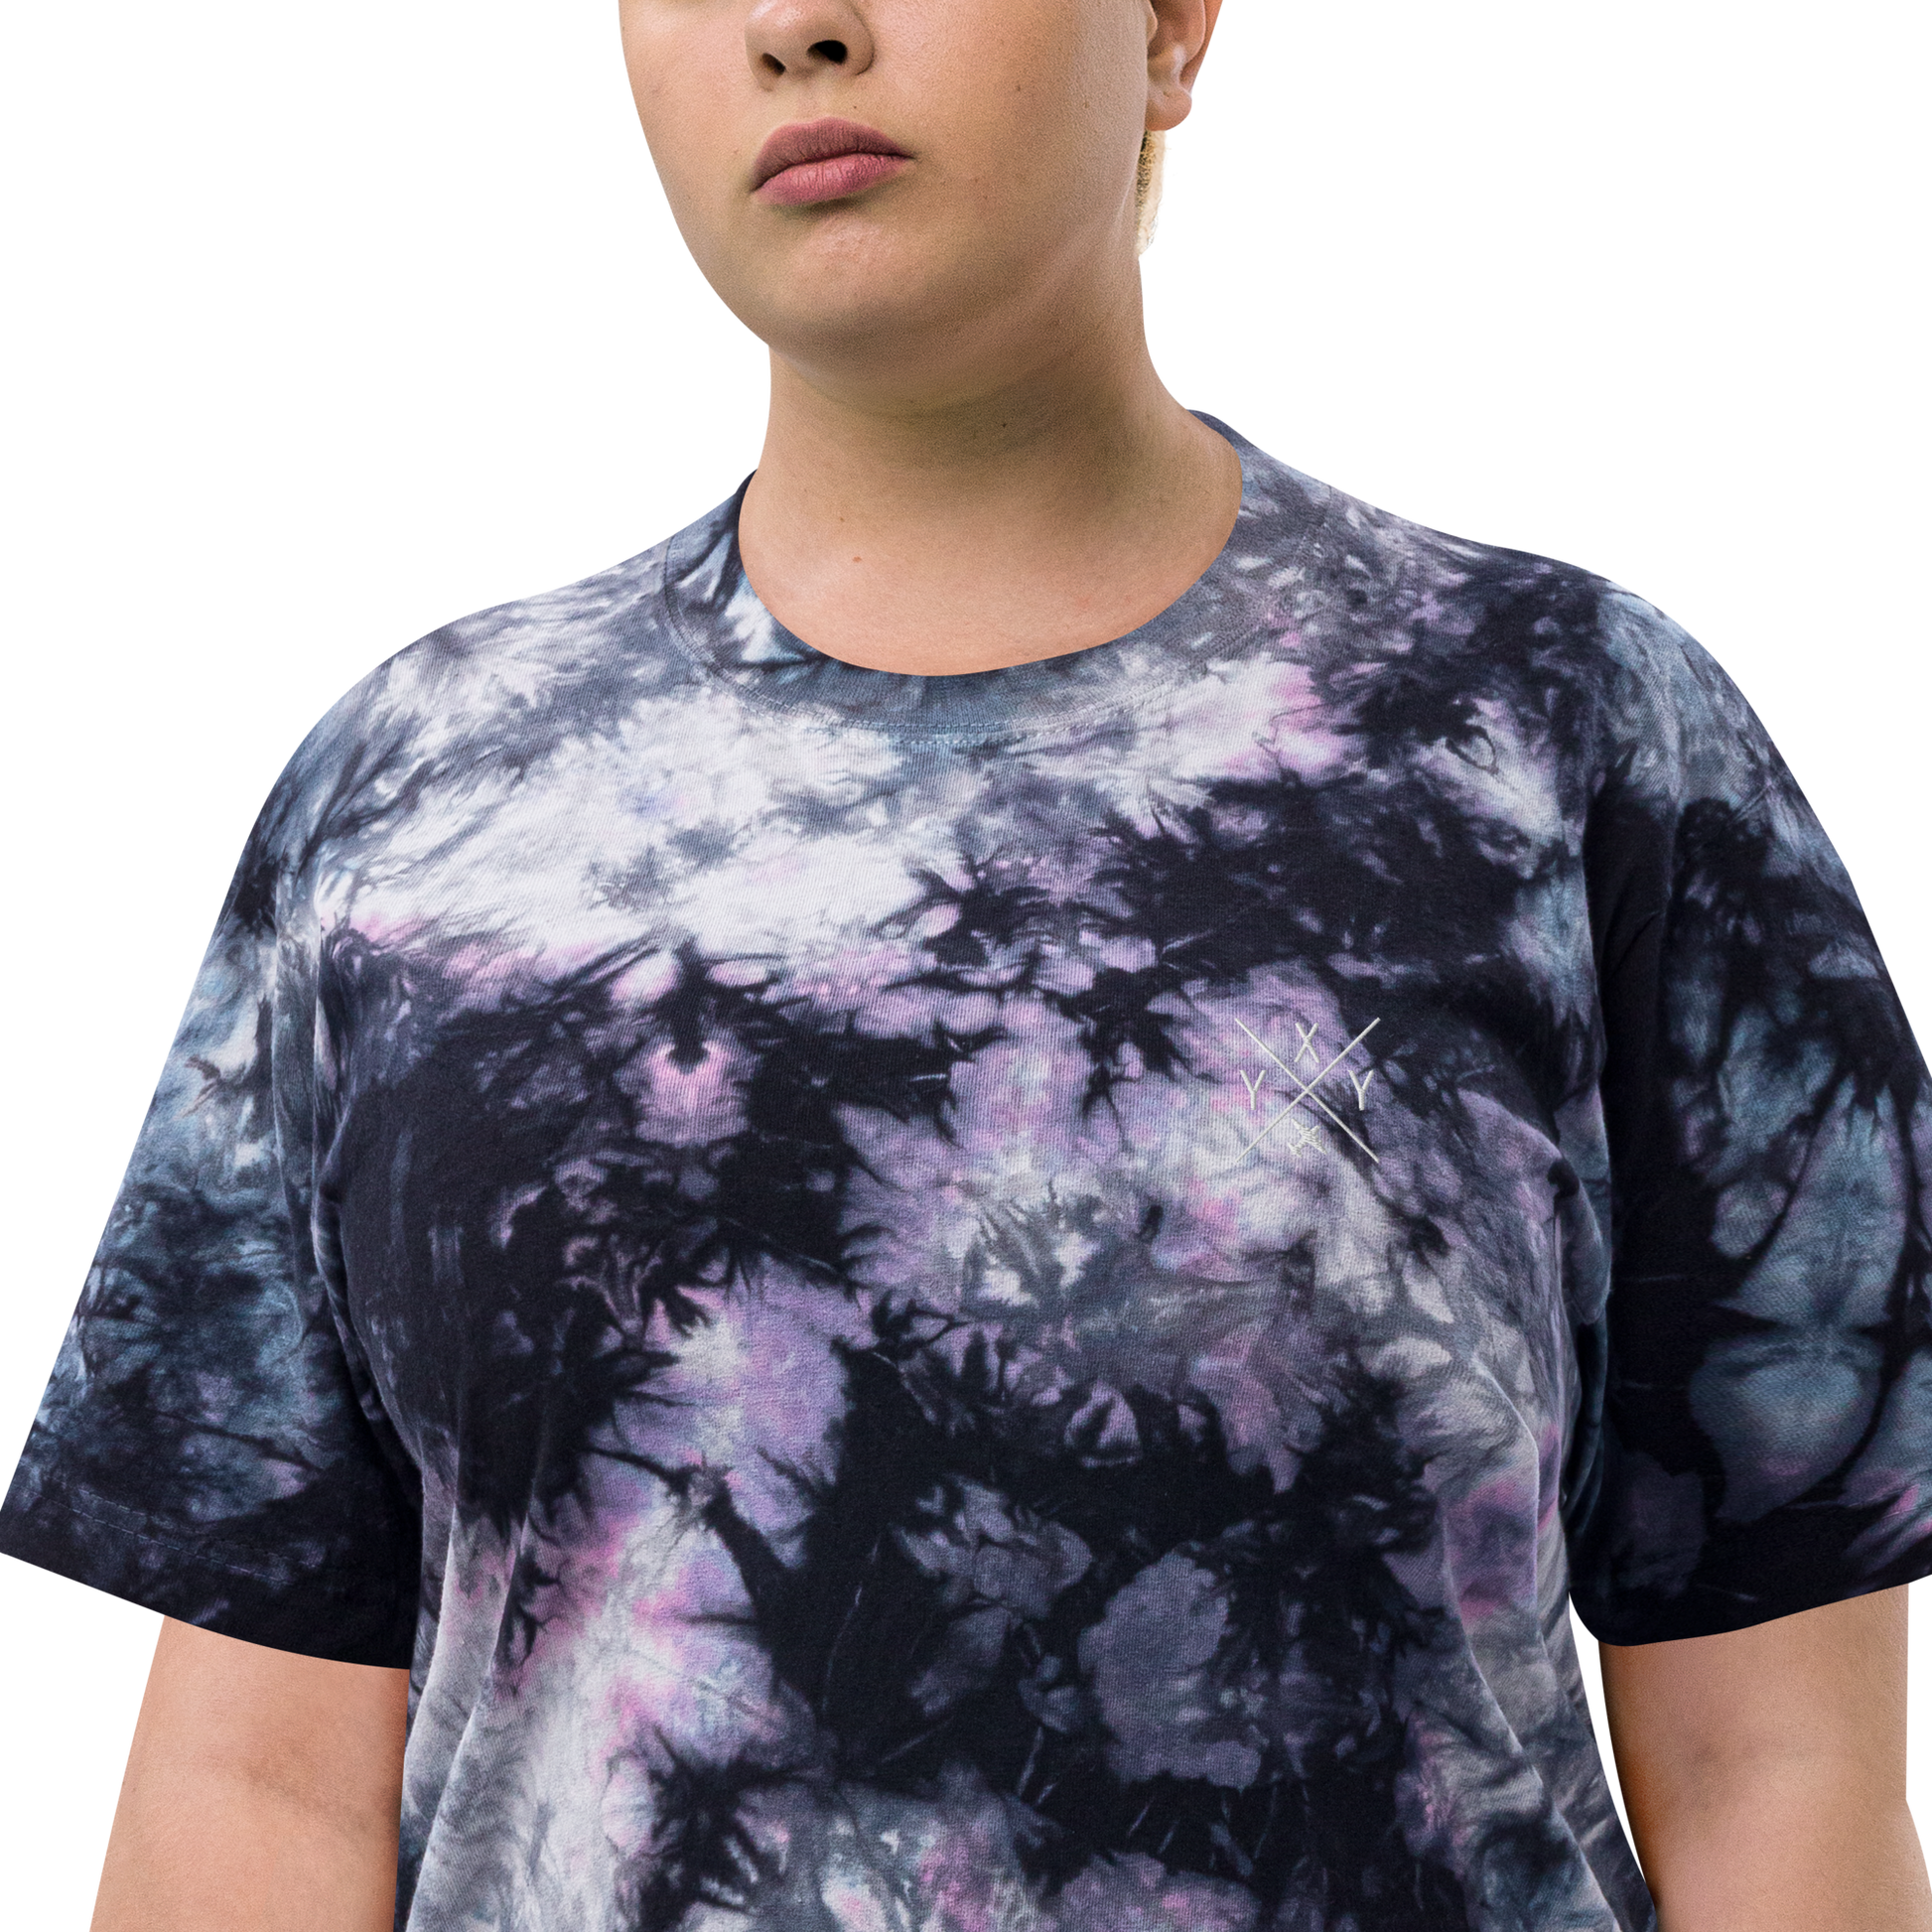 YHM Designs - YXY Whitehorse Oversized Tie-Dye T-Shirt - Crossed-X Design with Airport Code and Vintage Propliner - White Embroidery - Image 07